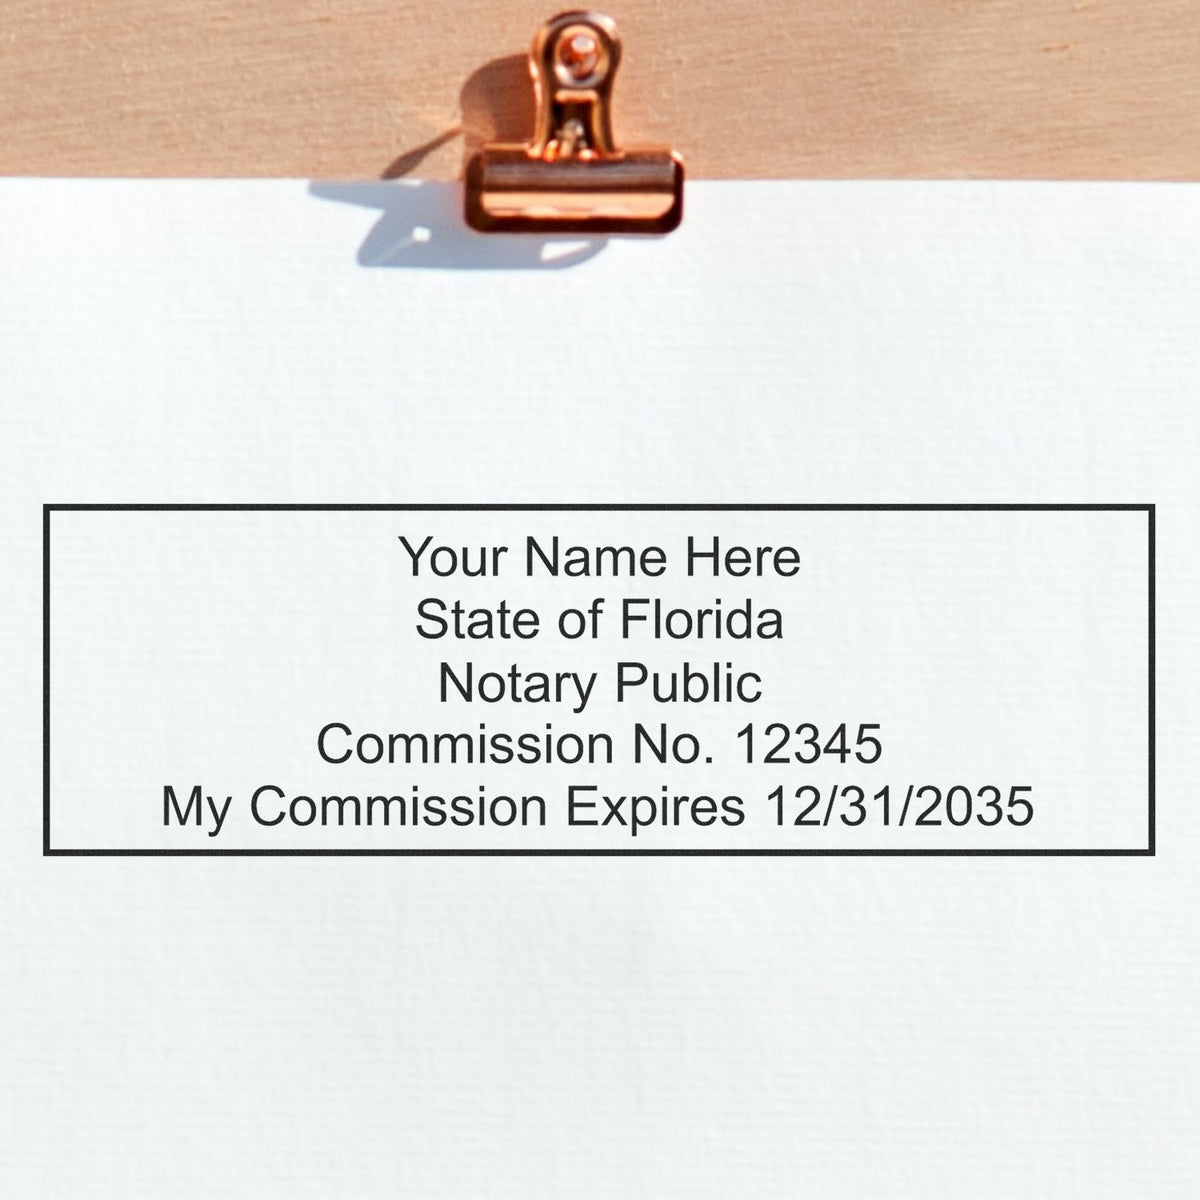 An alternative view of the Super Slim Florida Notary Public Stamp stamped on a sheet of paper showing the image in use